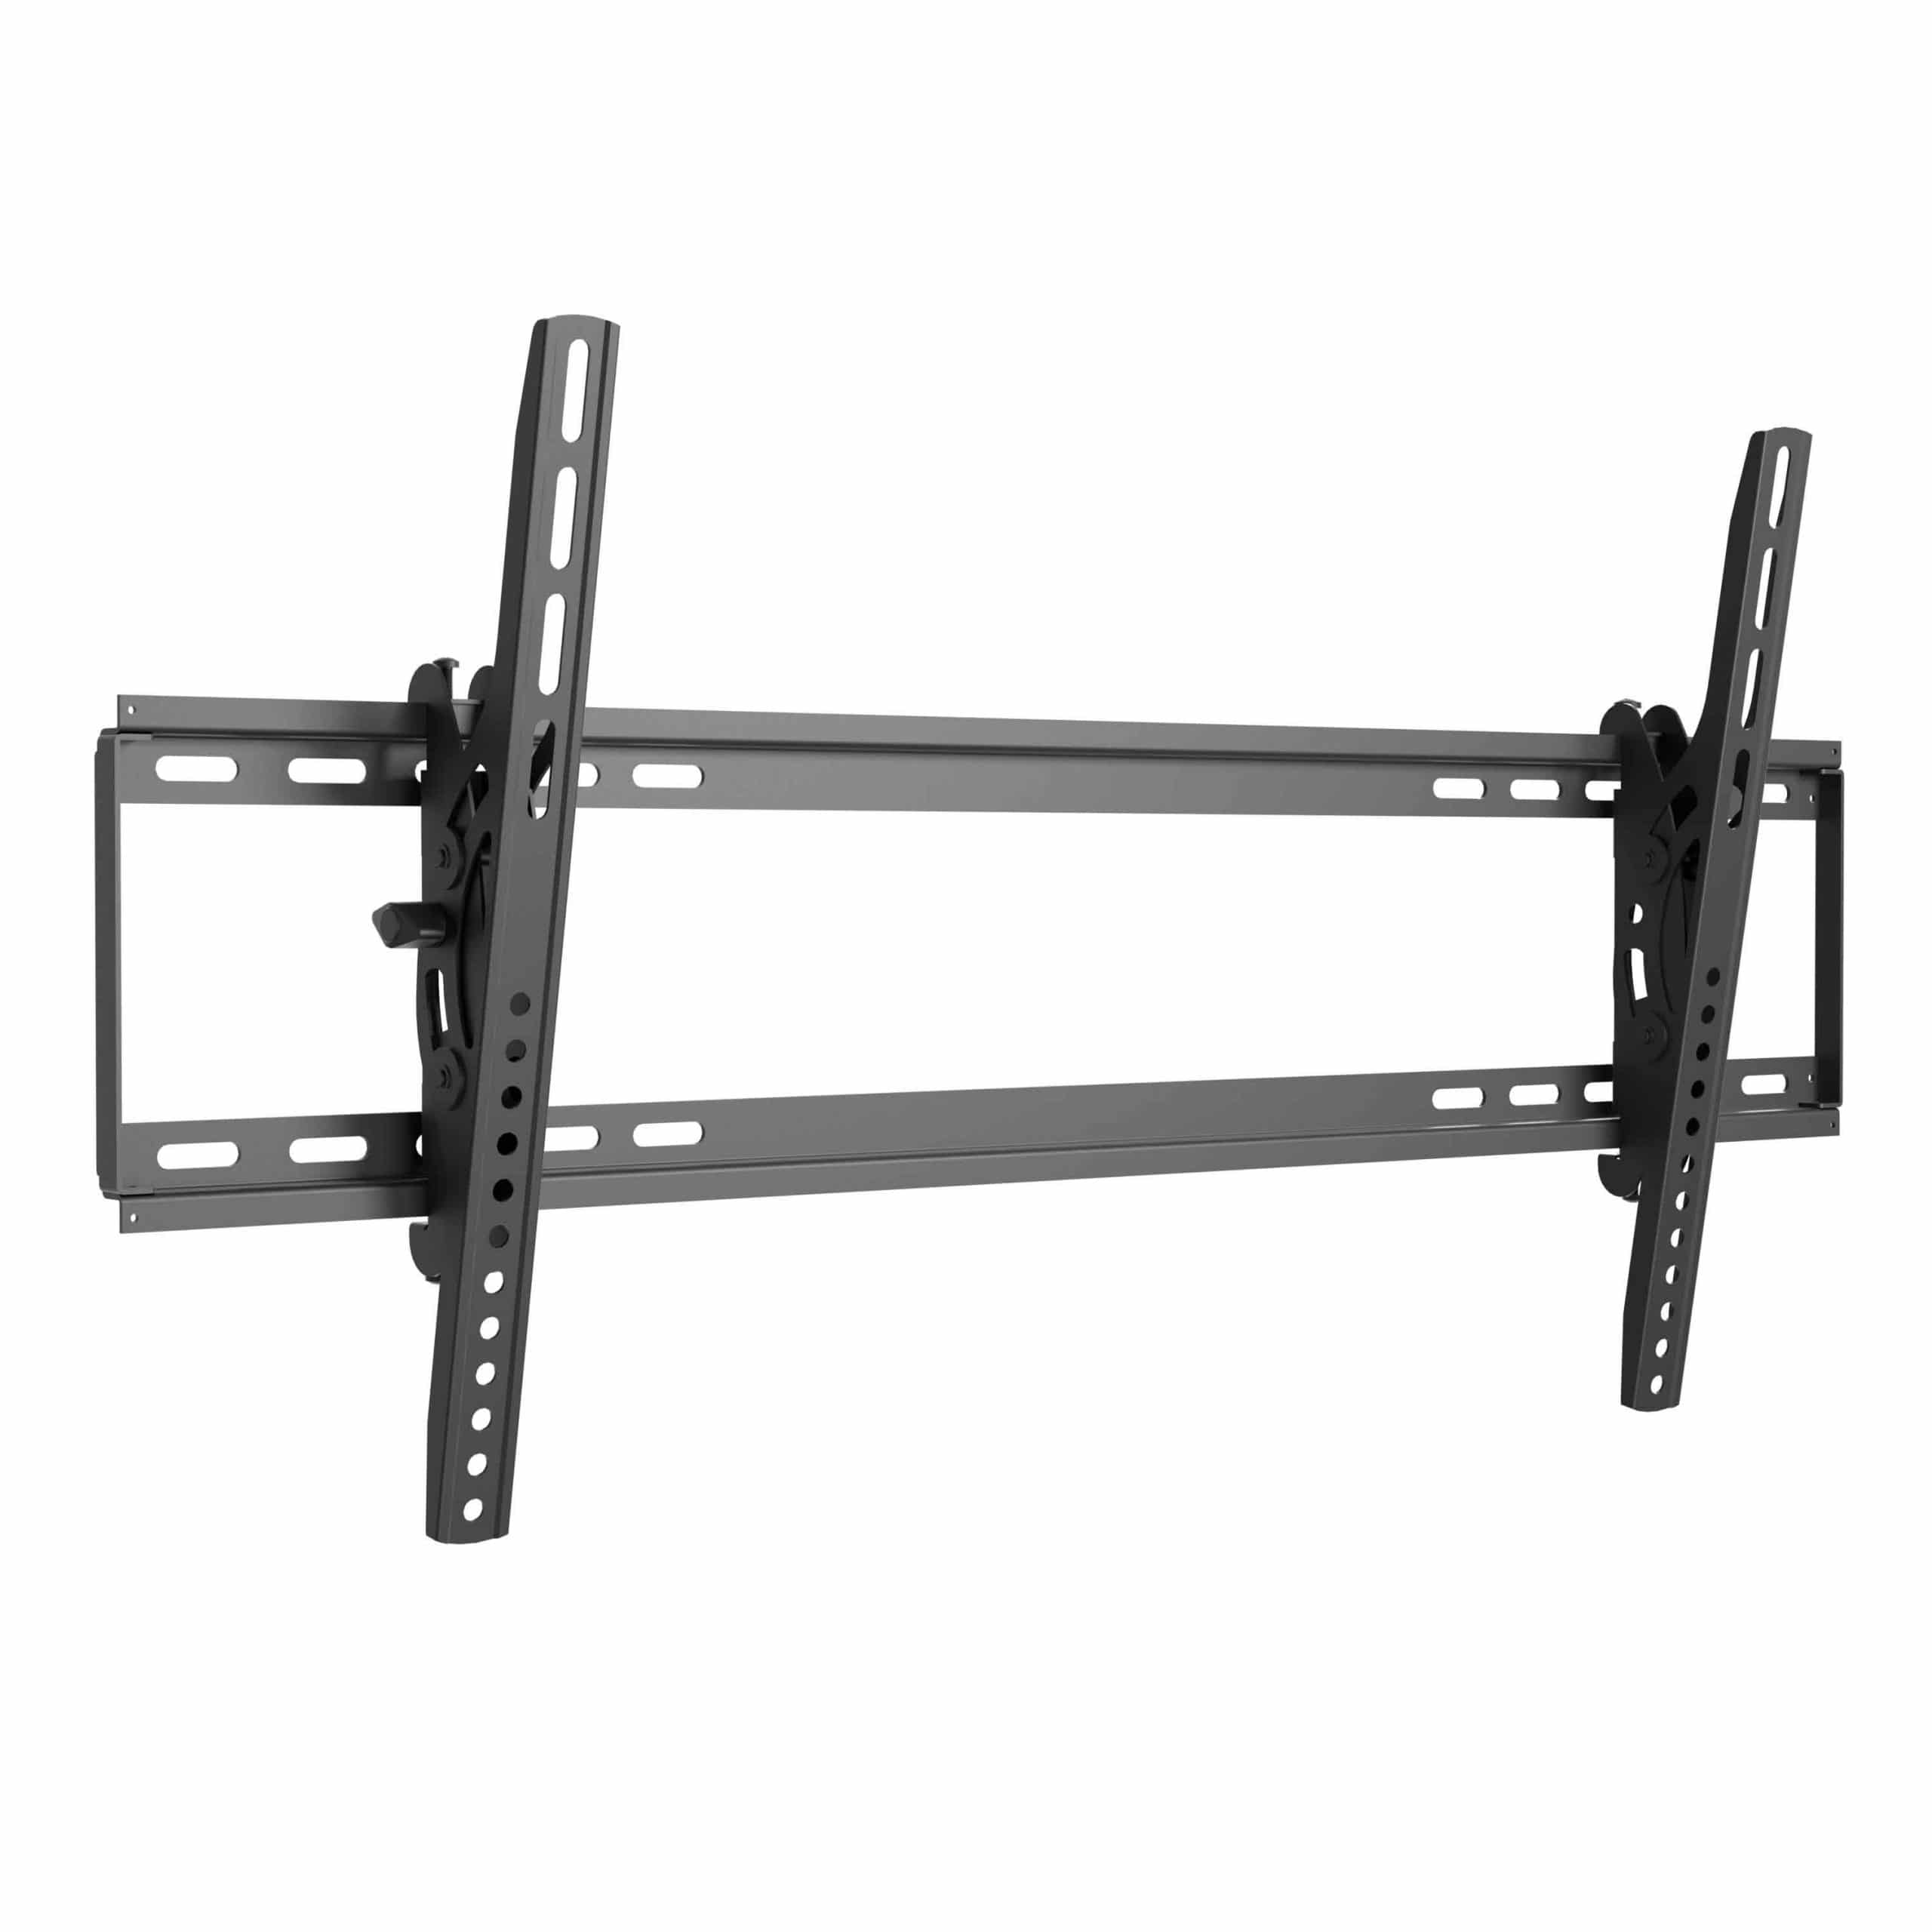 ProMounts Tilt Open Plate TV Wall Mount for 50-90 Inch Screens, Holds up to 132Lbs